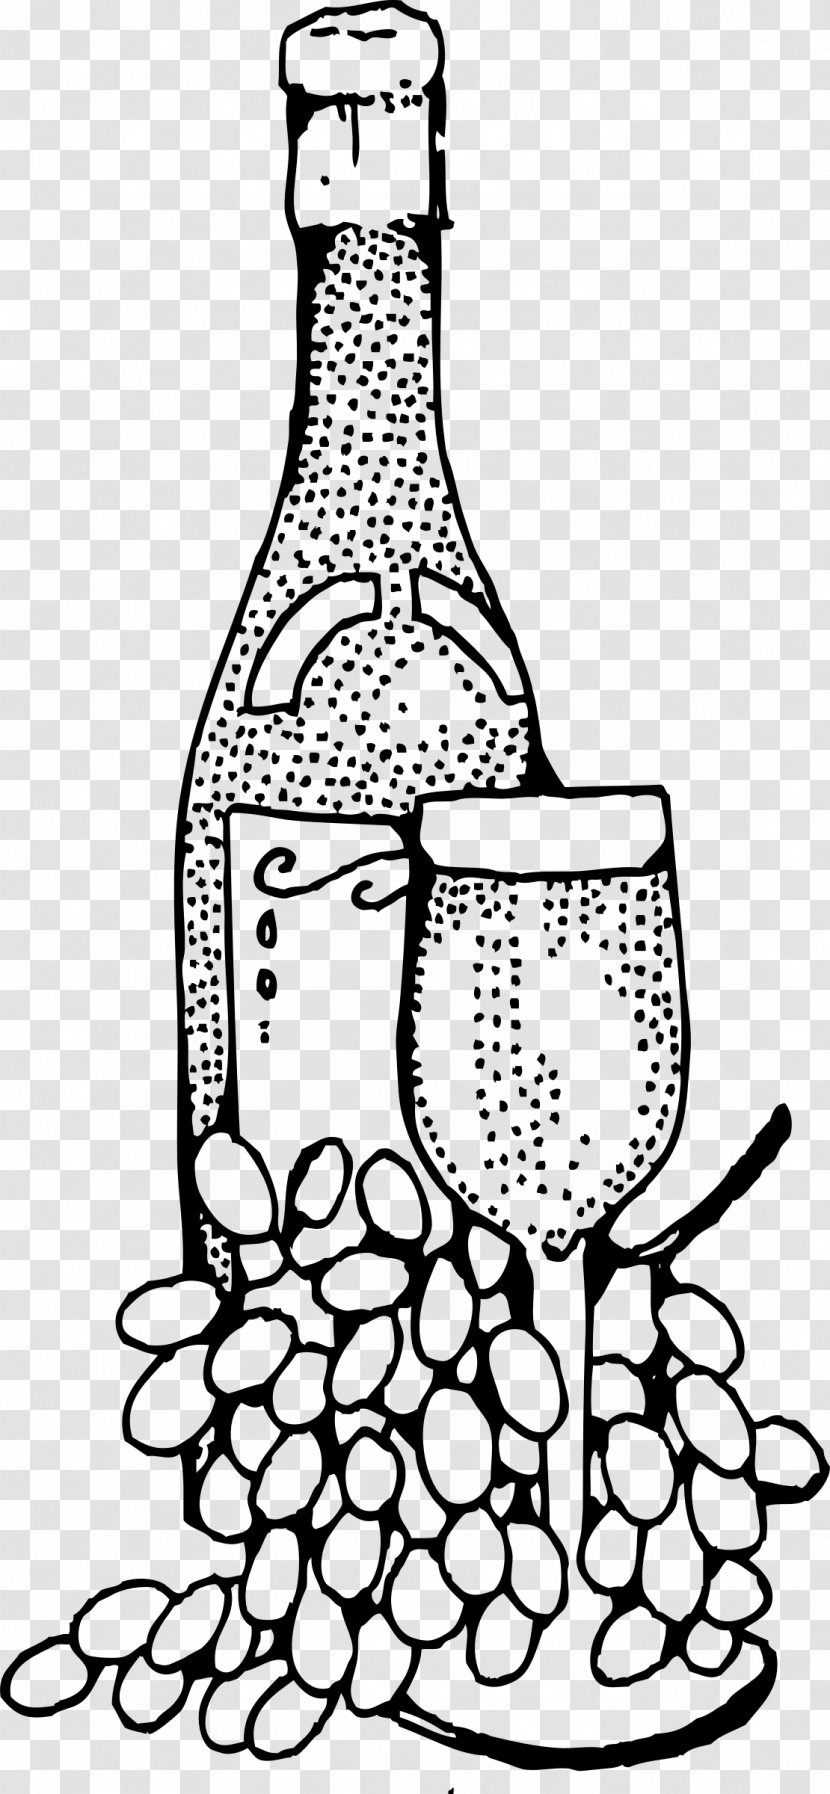 Wine Bottle Ready-to-Use Food And Drink Spot Illustrations Clip Art - Line - Sketch Transparent PNG